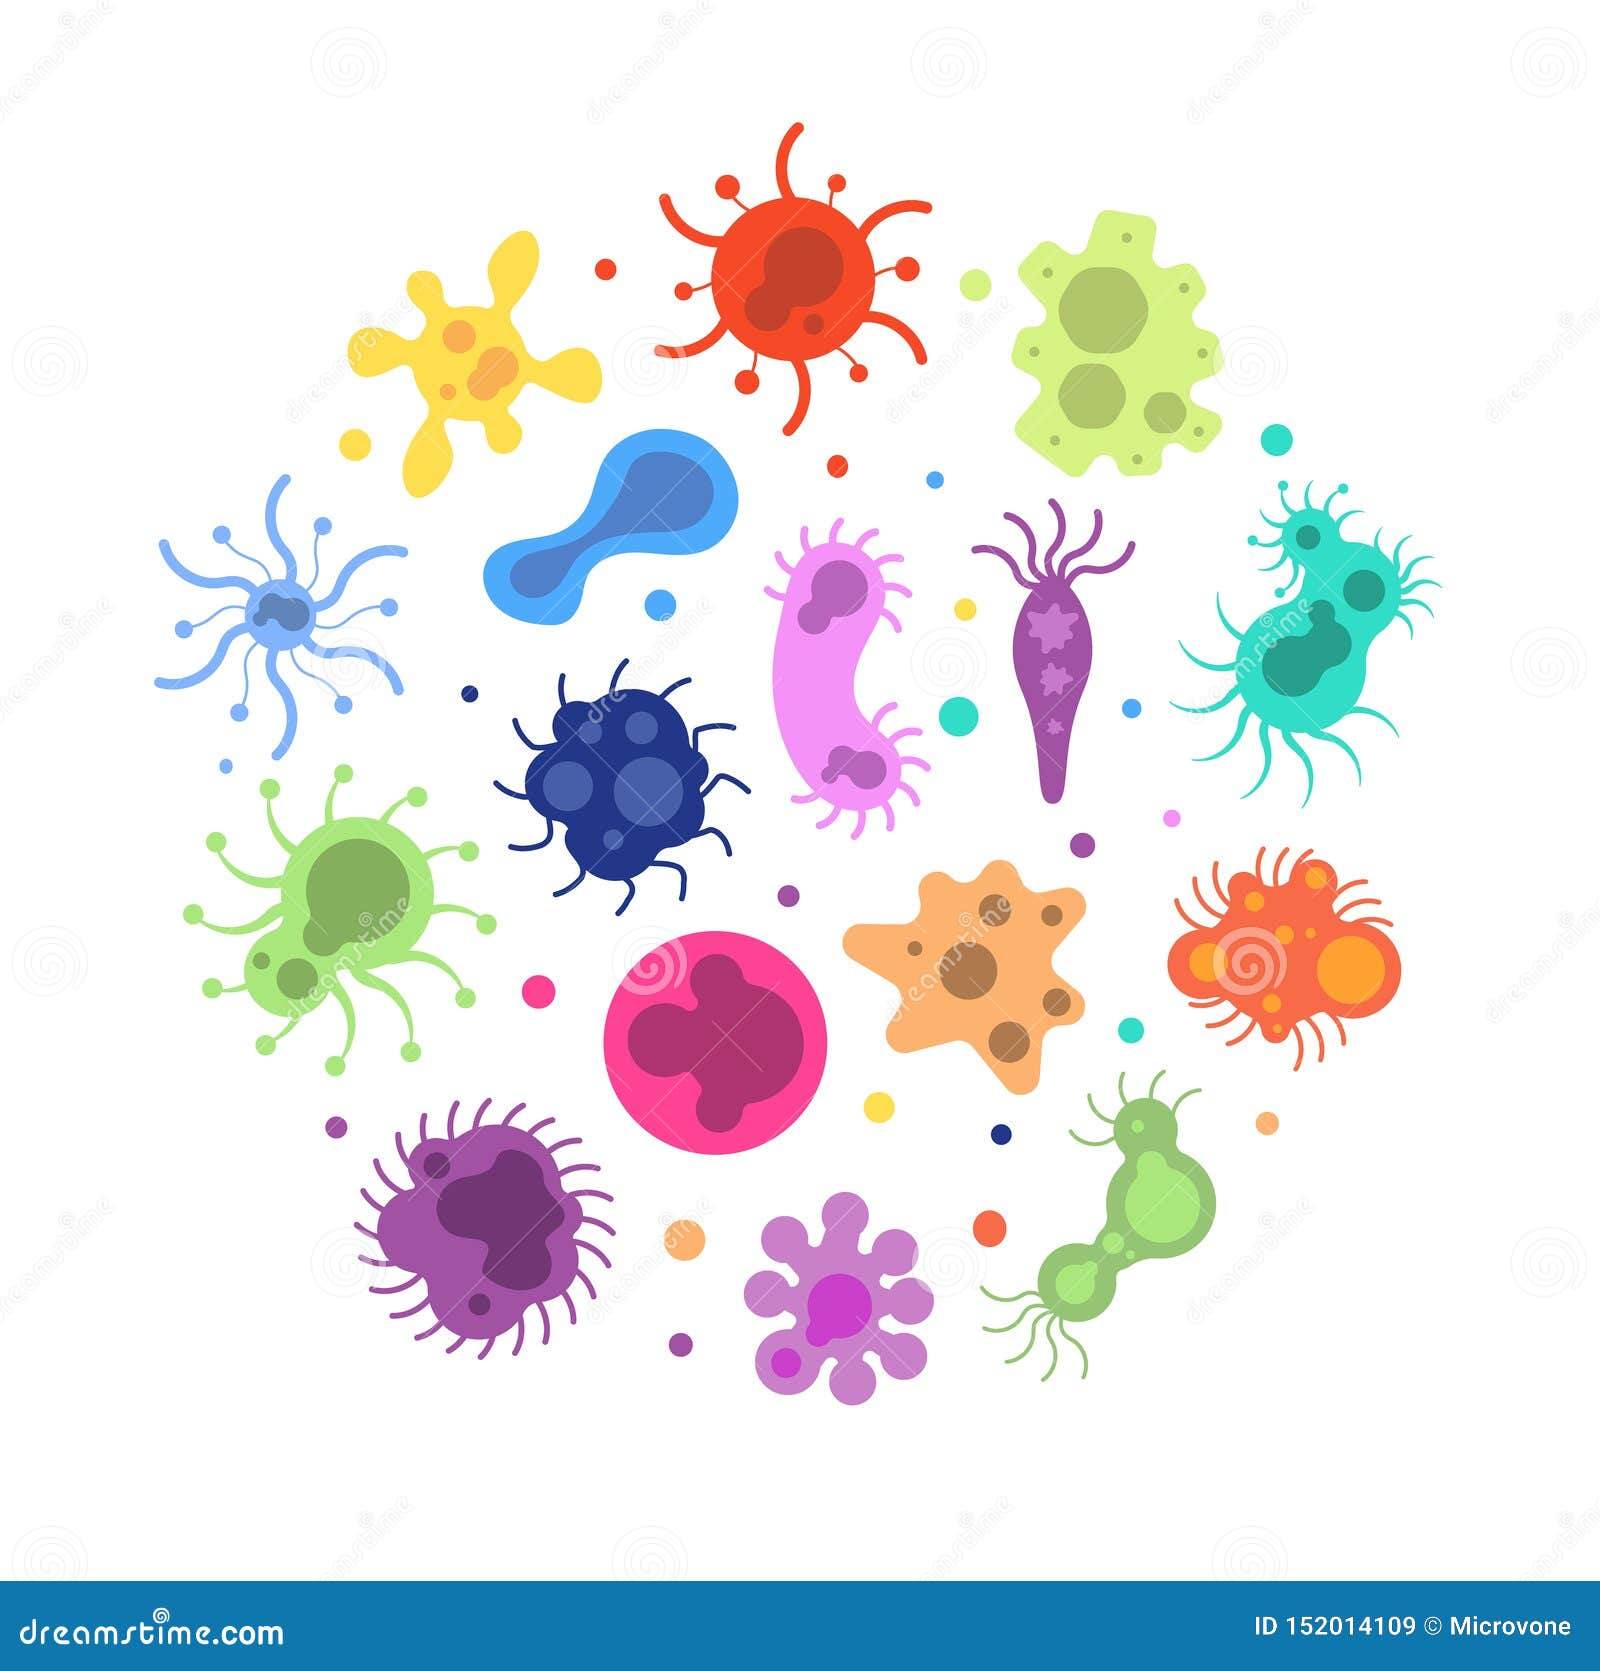 bacteria germ. pandemic viruses biological, allergy microbes bacteria epidemiology. infection germs flu diseases 